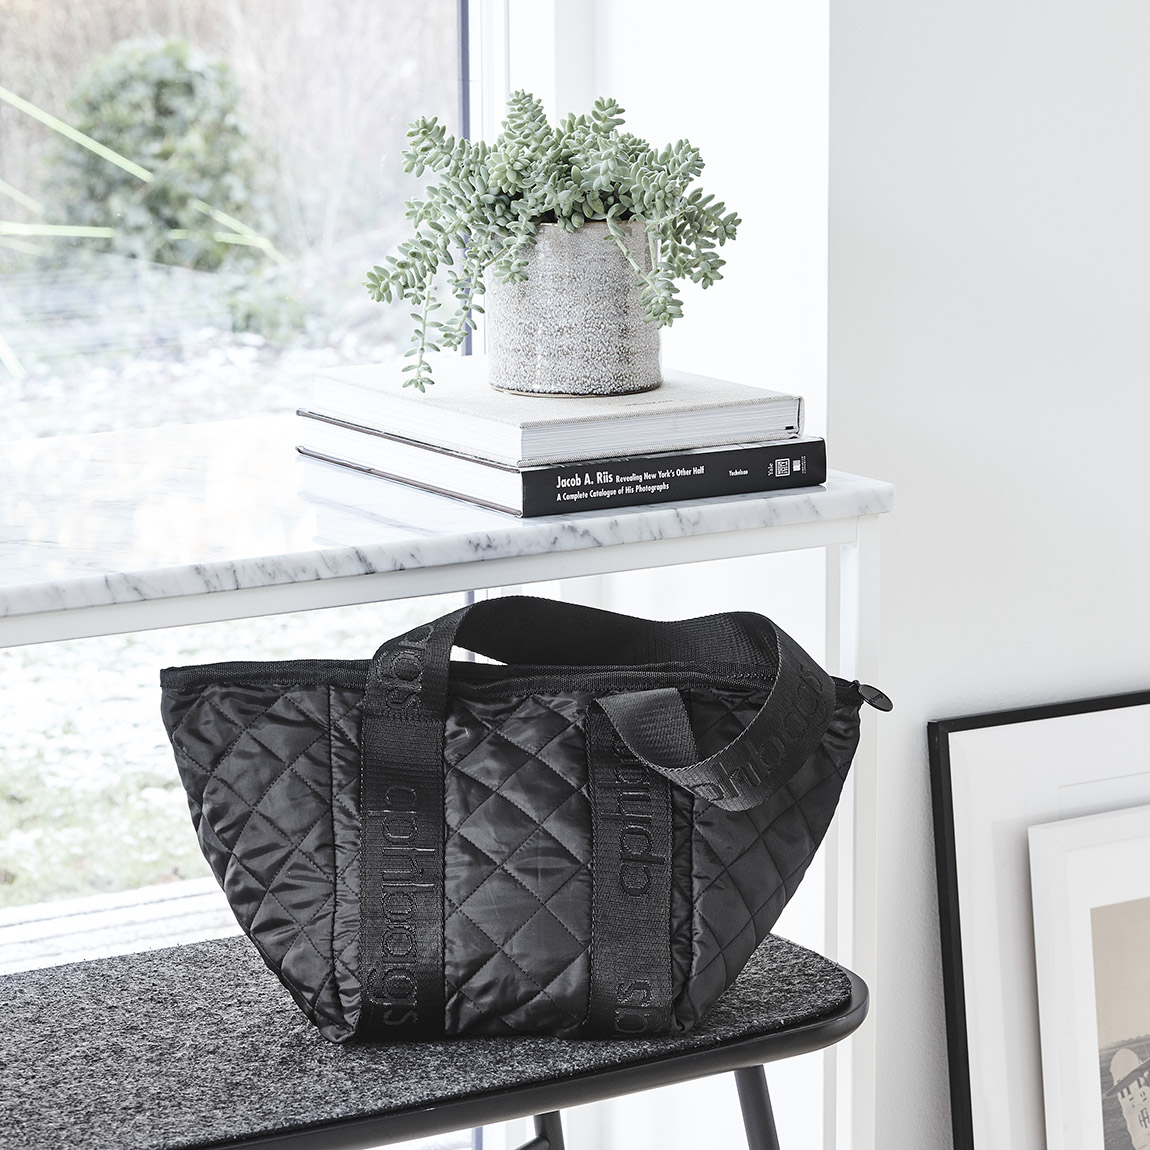 cphbags: Functionality, sustainability, and exceptional quality